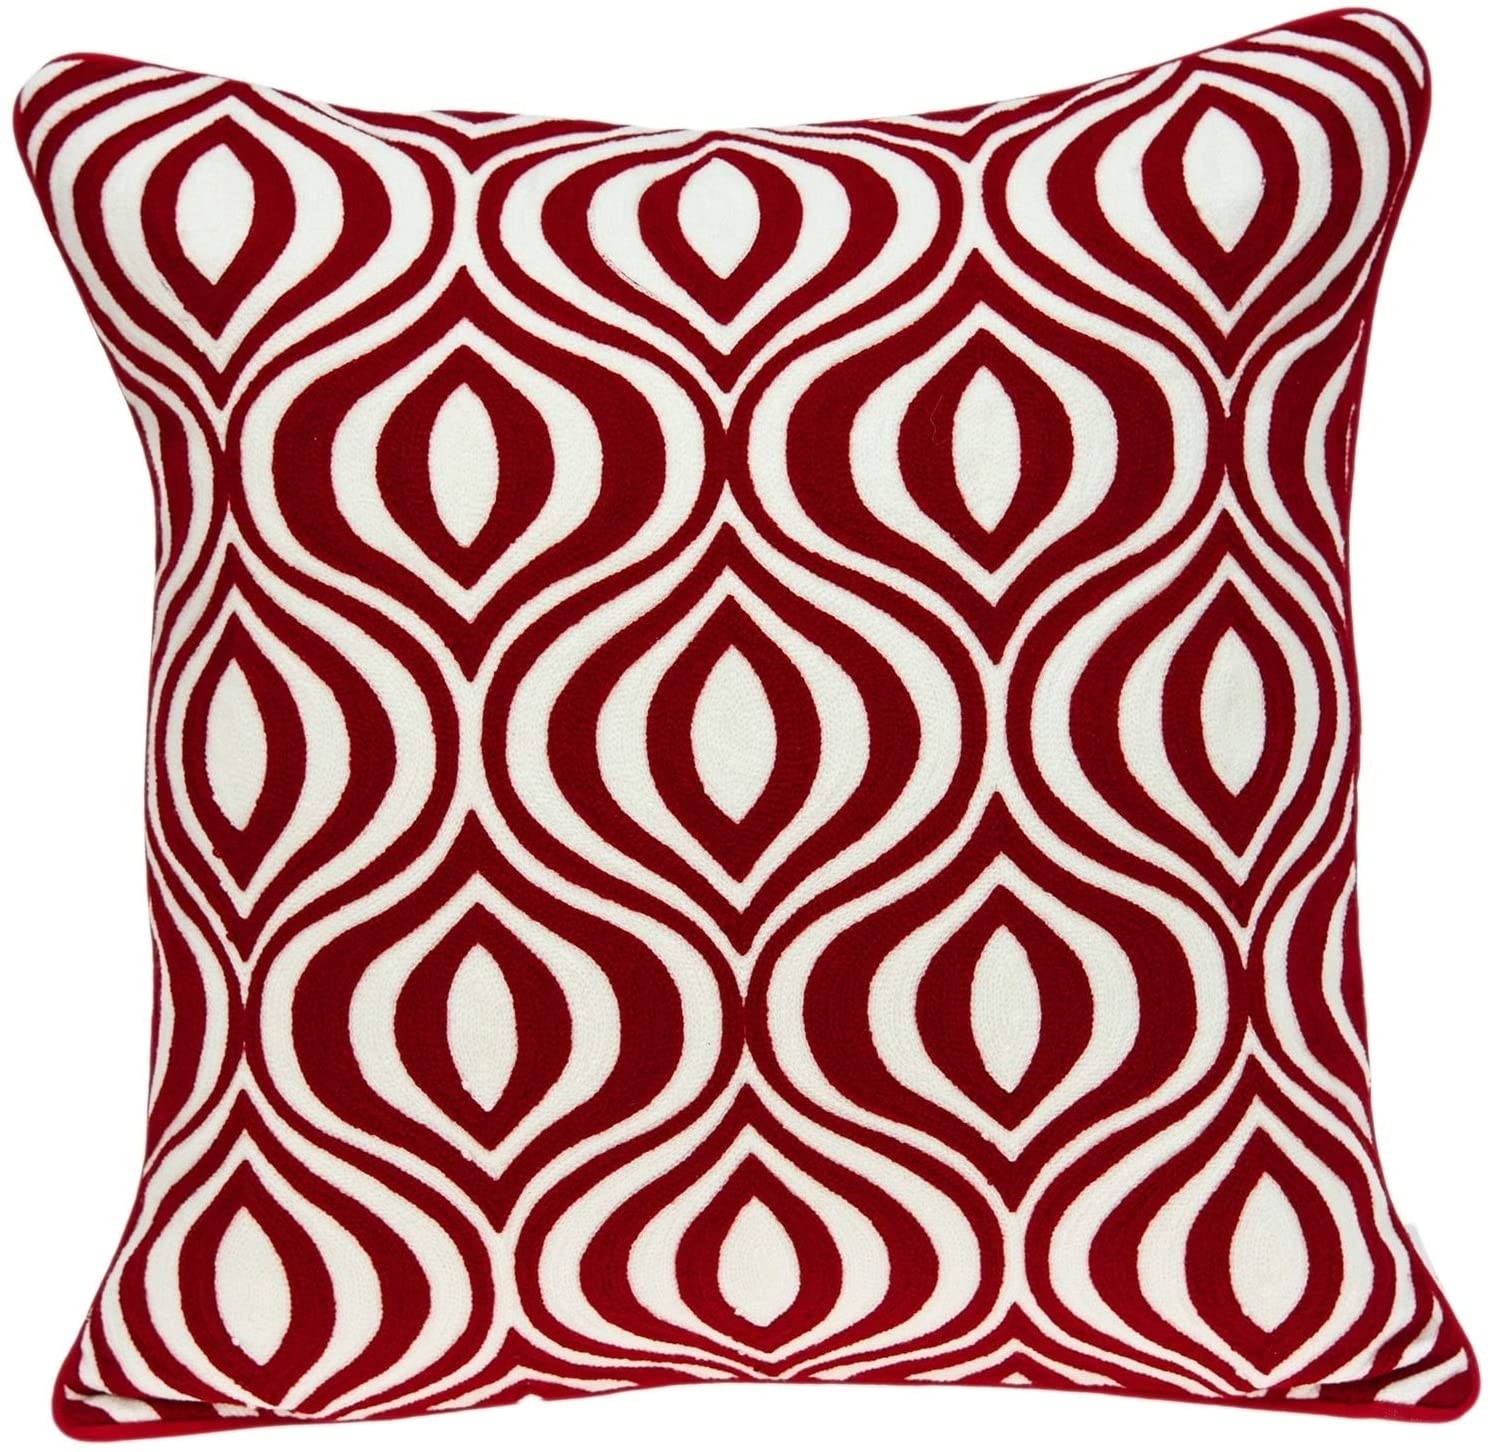 MISC Traditional Beige Pillow Cover Damask Classic Cotton Removable